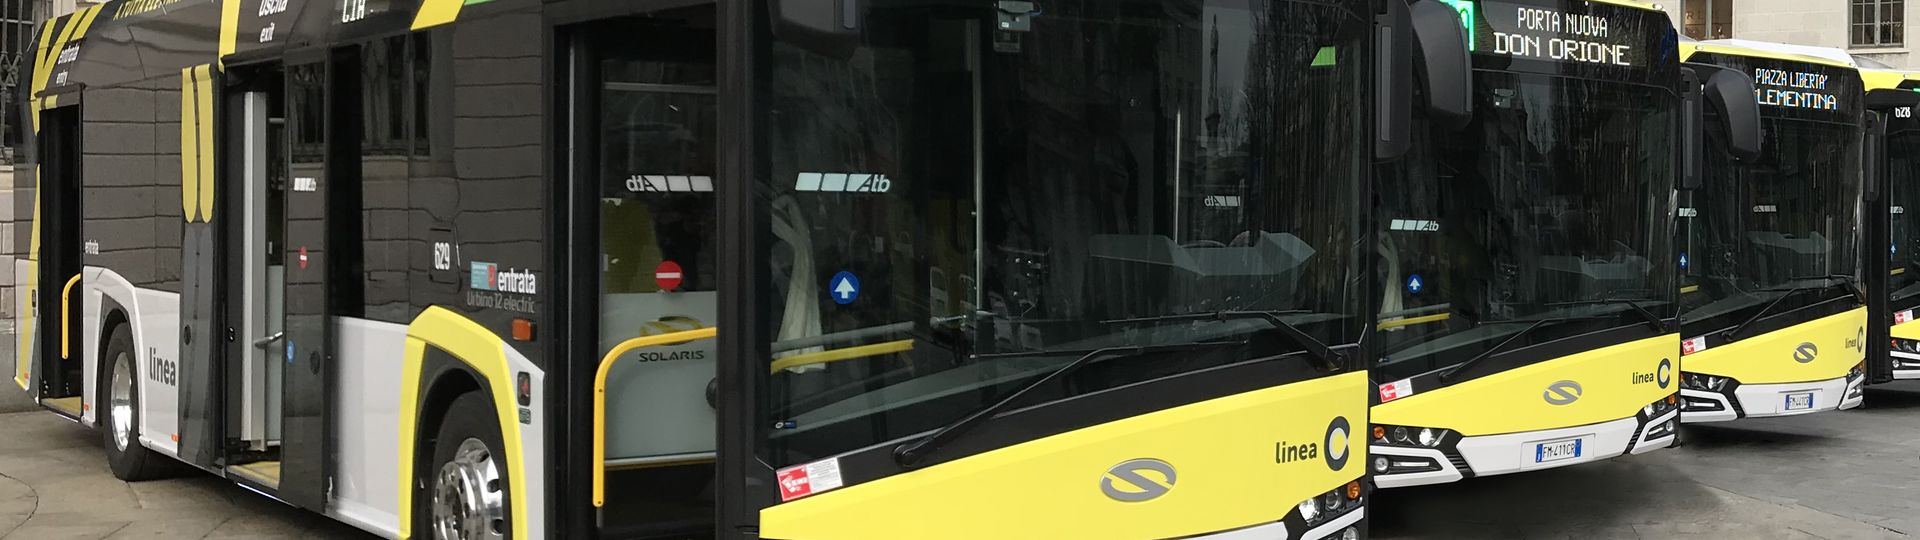 Solaris has delivered 12 electric buses to Bergamo